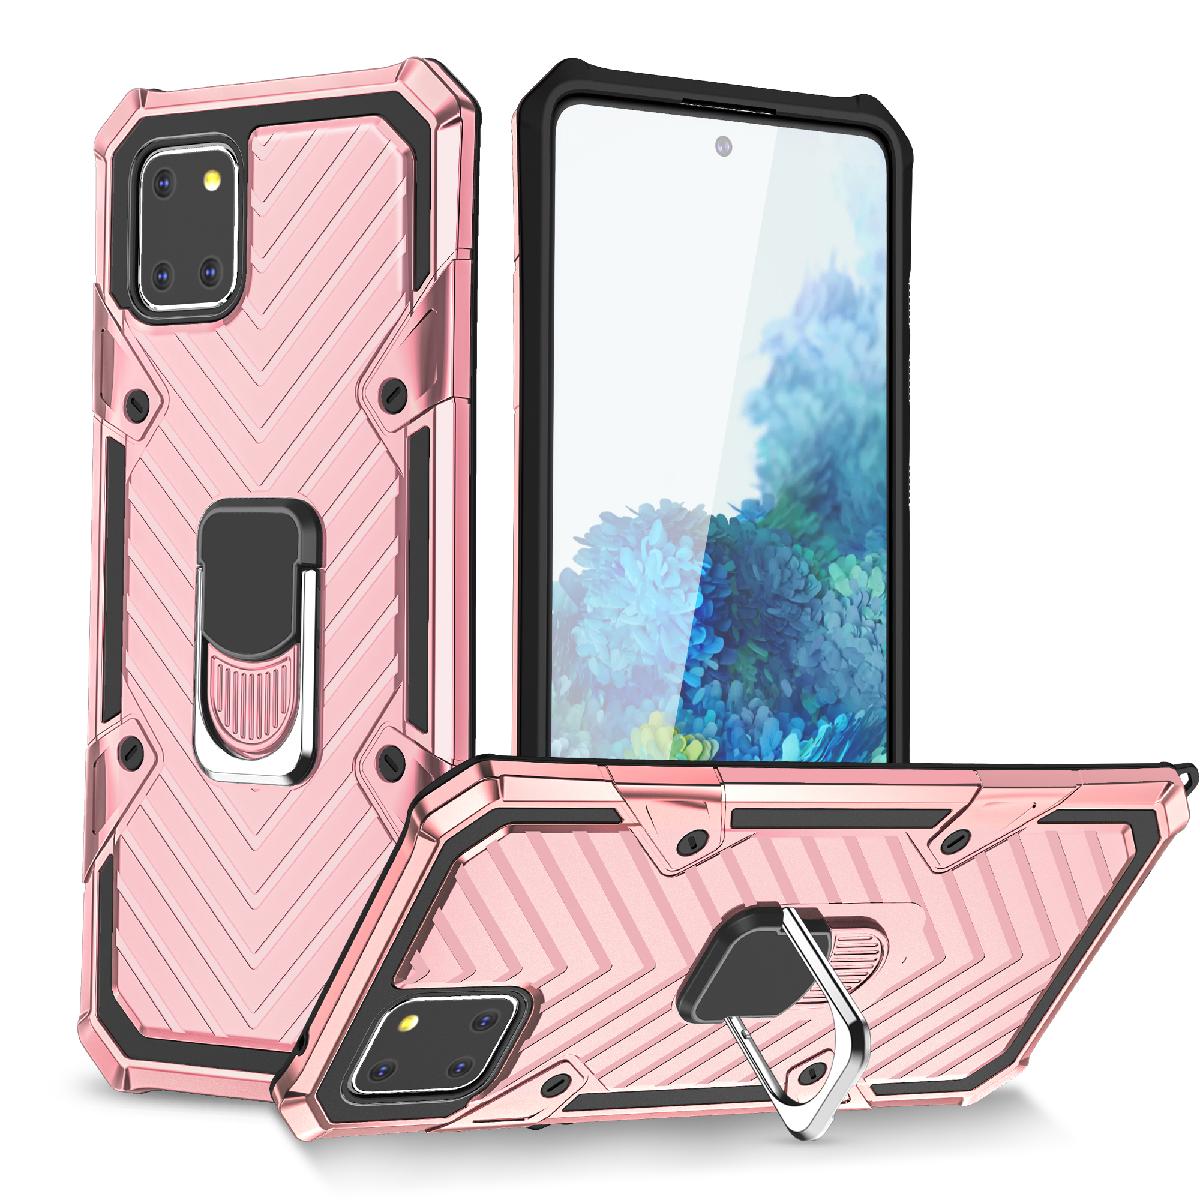 Reiko Kickstand Anti-Shock And Anti Falling Case for SAMSUNG GALAXY A81 In Rose Gold